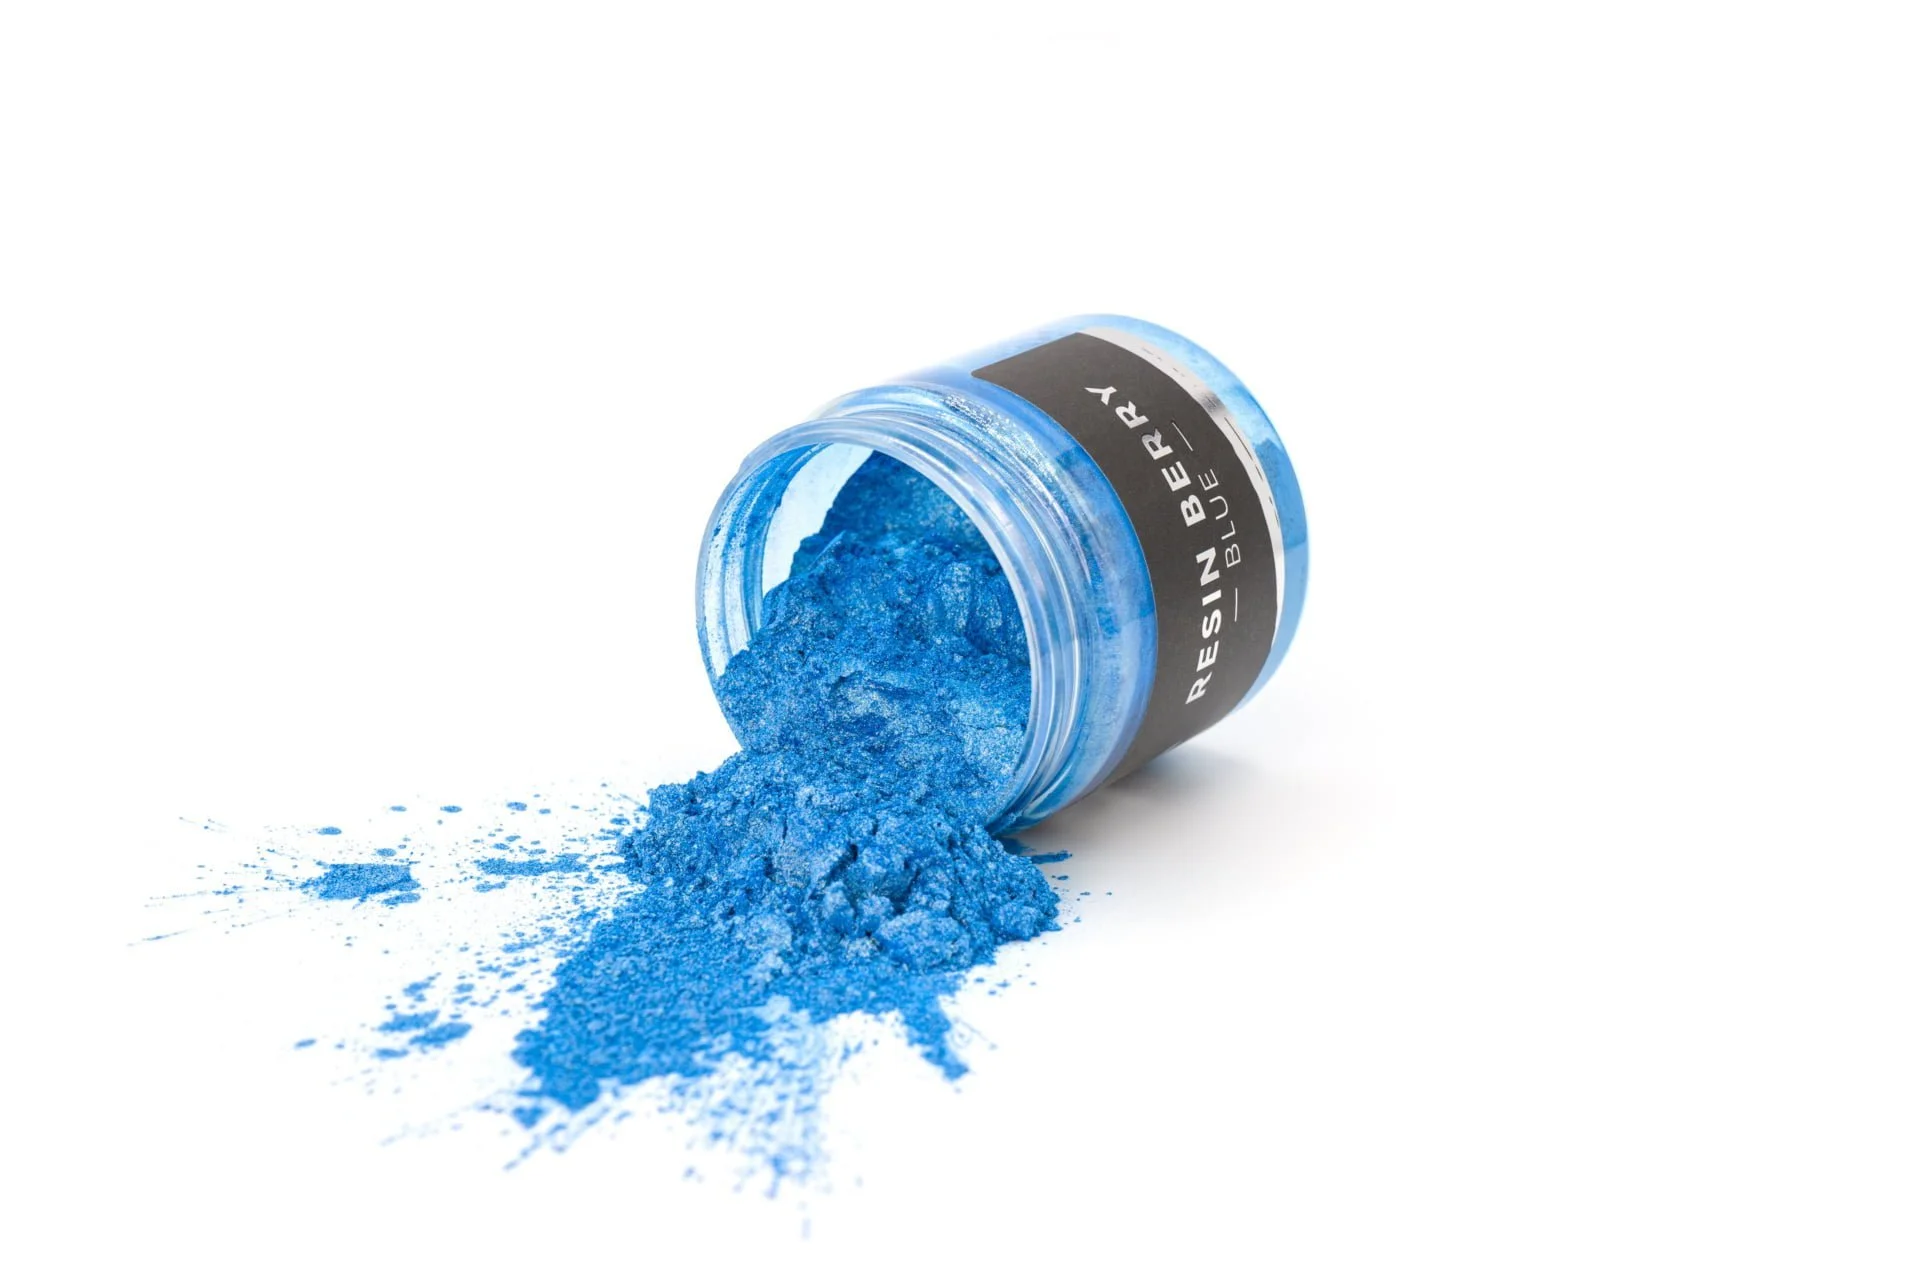 Blue Pigment for Epoxy Resin - Mica Powder Blue for Epoxy - 50g